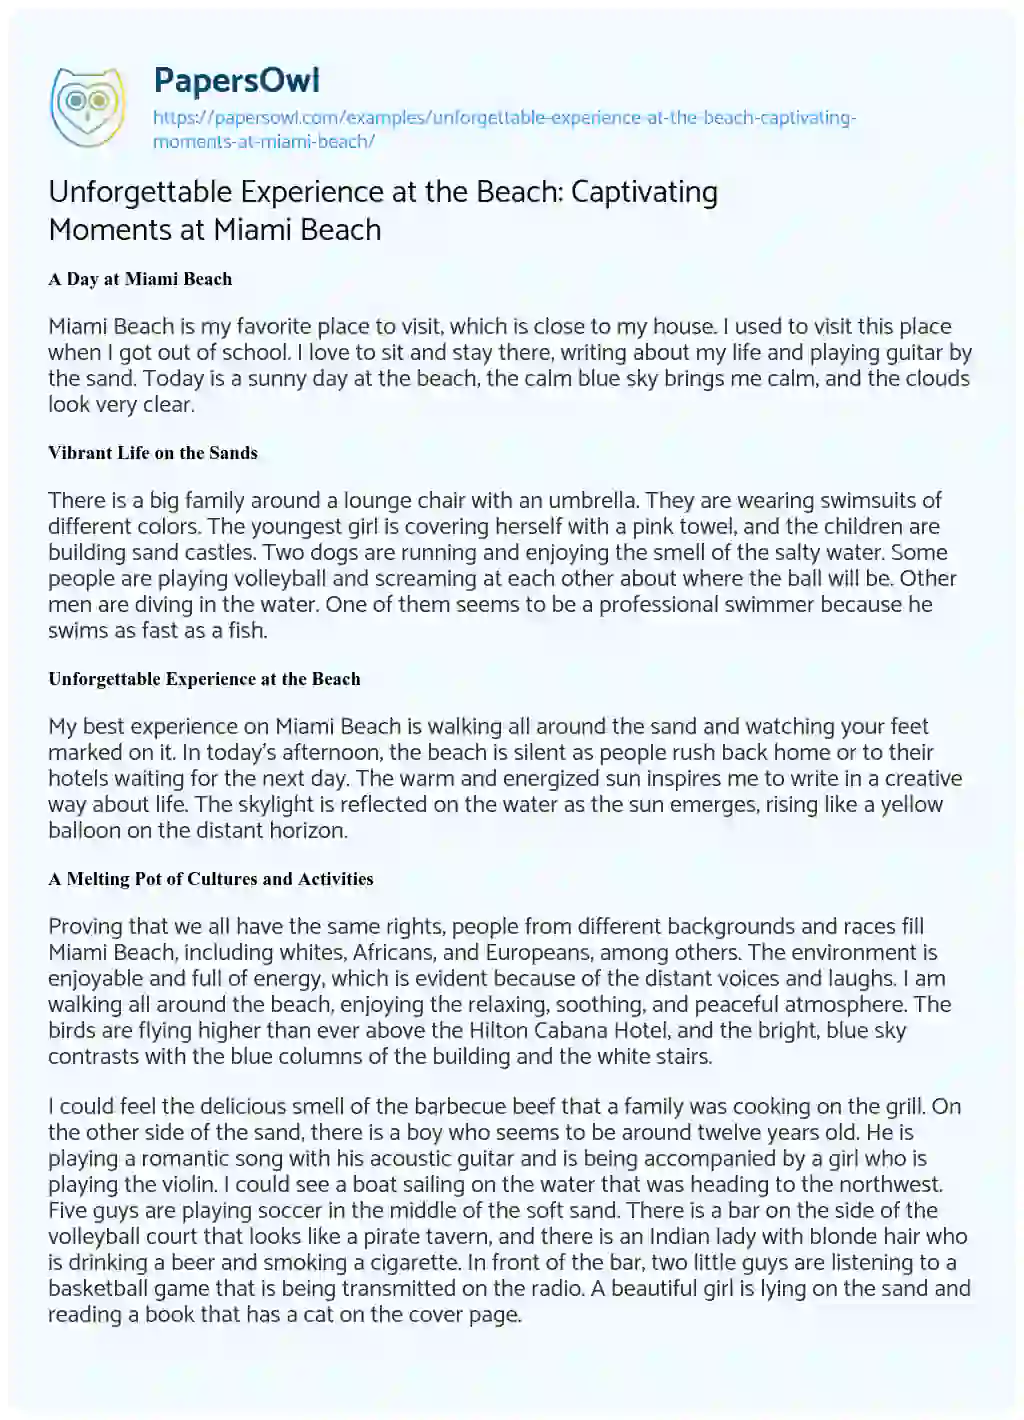 Essay on Unforgettable Experience at the Beach: Captivating Moments at Miami Beach